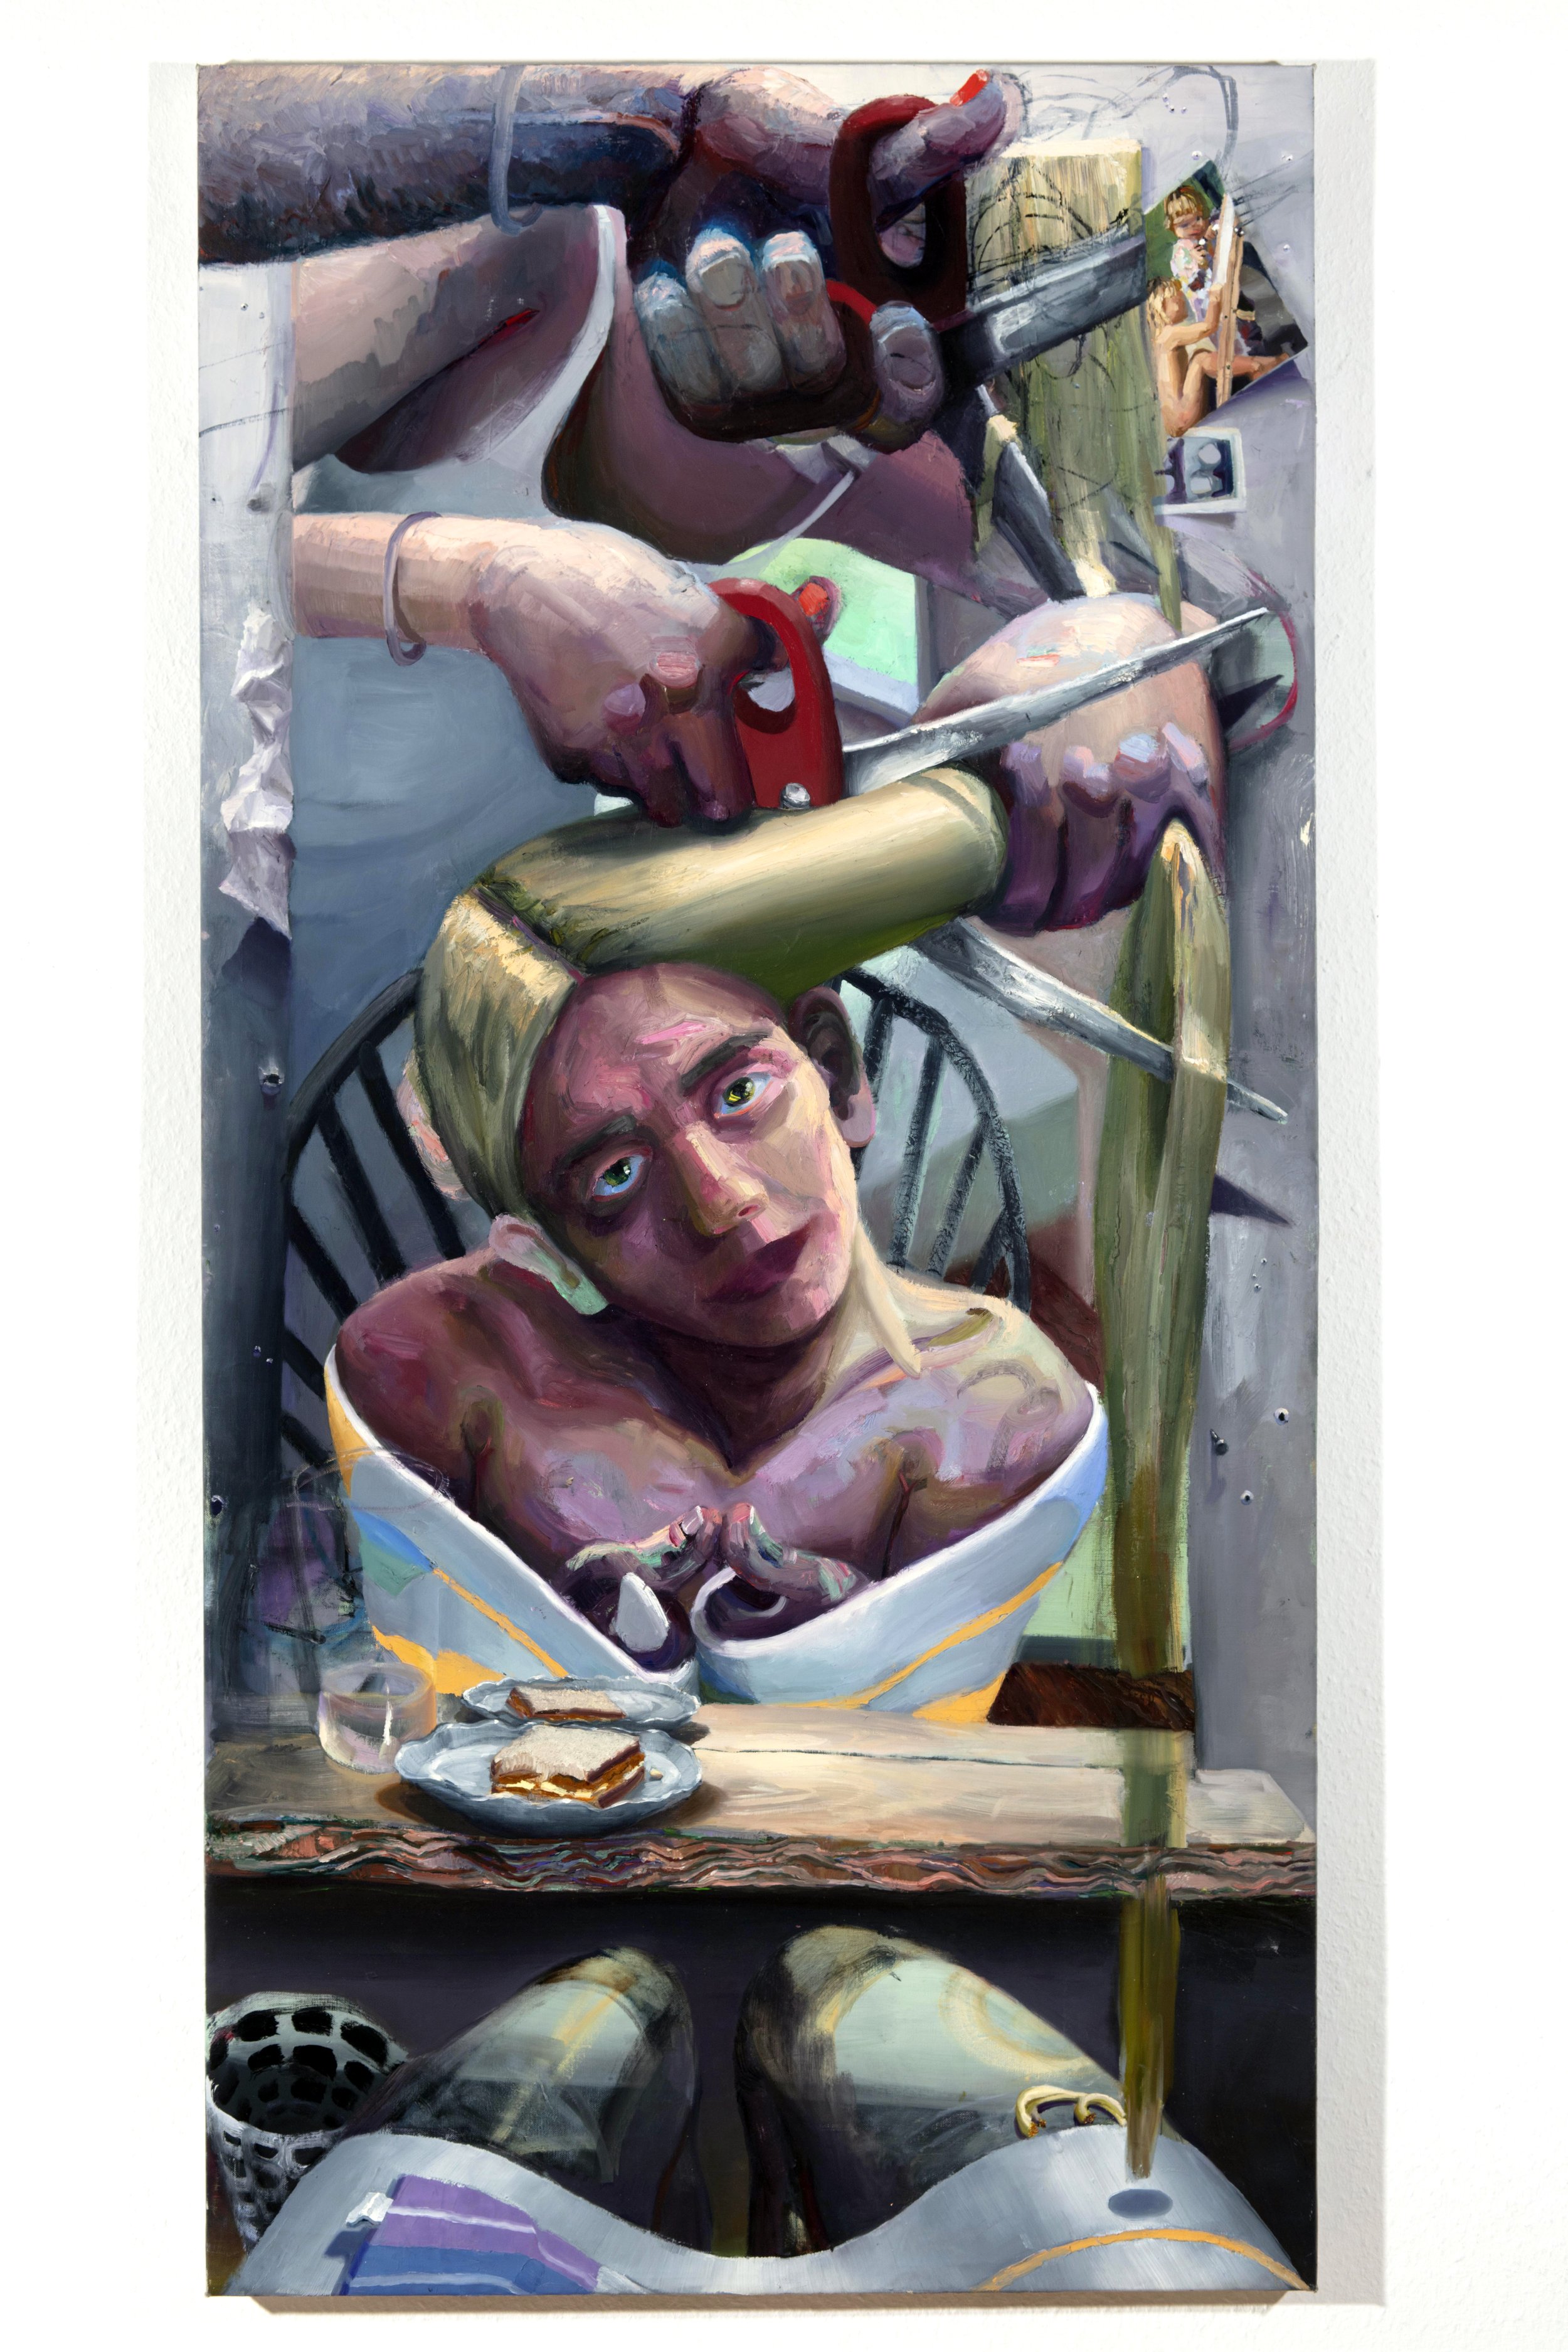   Snip , 2019, oil on linen, 72 x 36 in    ADDITIONAL DETAILS  